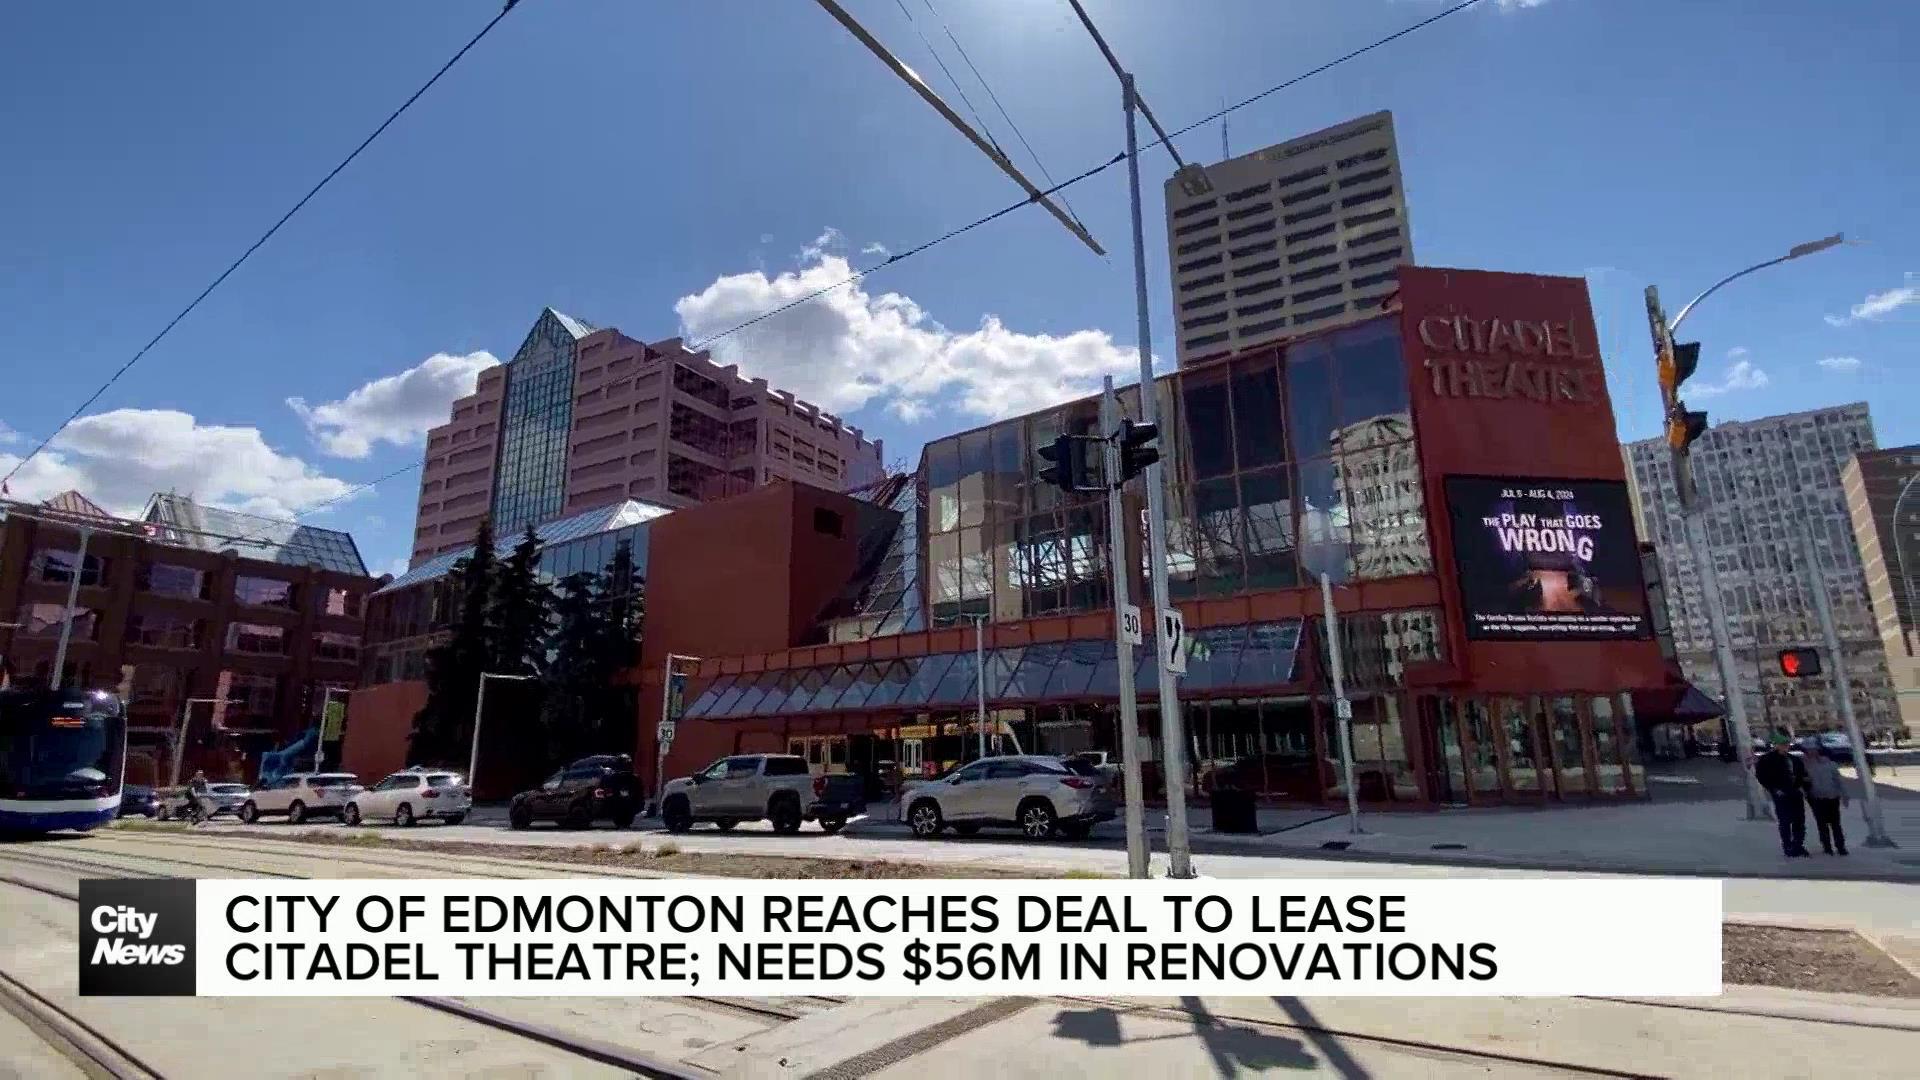 City and Citadel Theatre reach agreement on lease